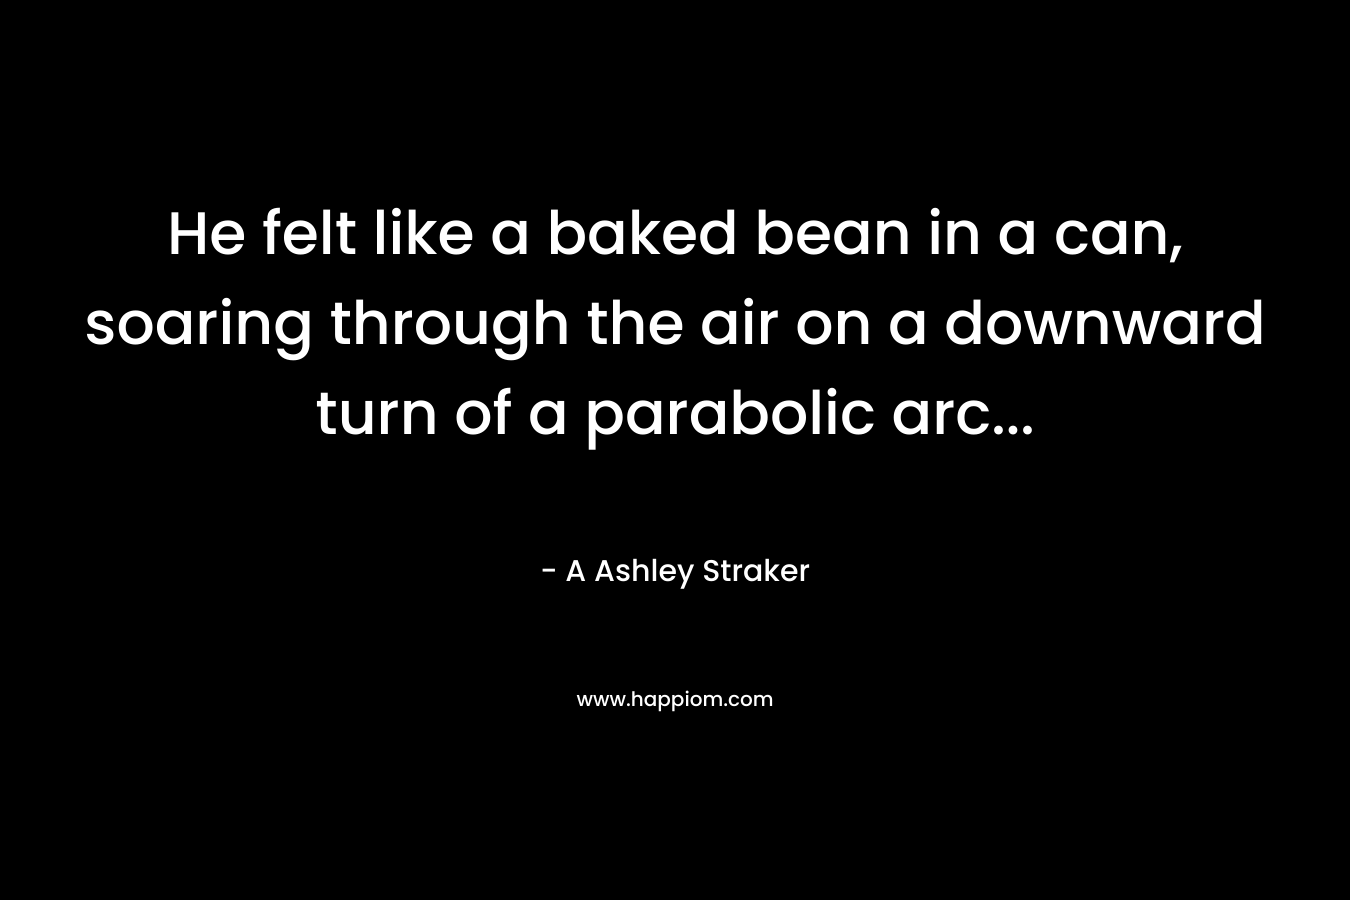 He felt like a baked bean in a can, soaring through the air on a downward turn of a parabolic arc...